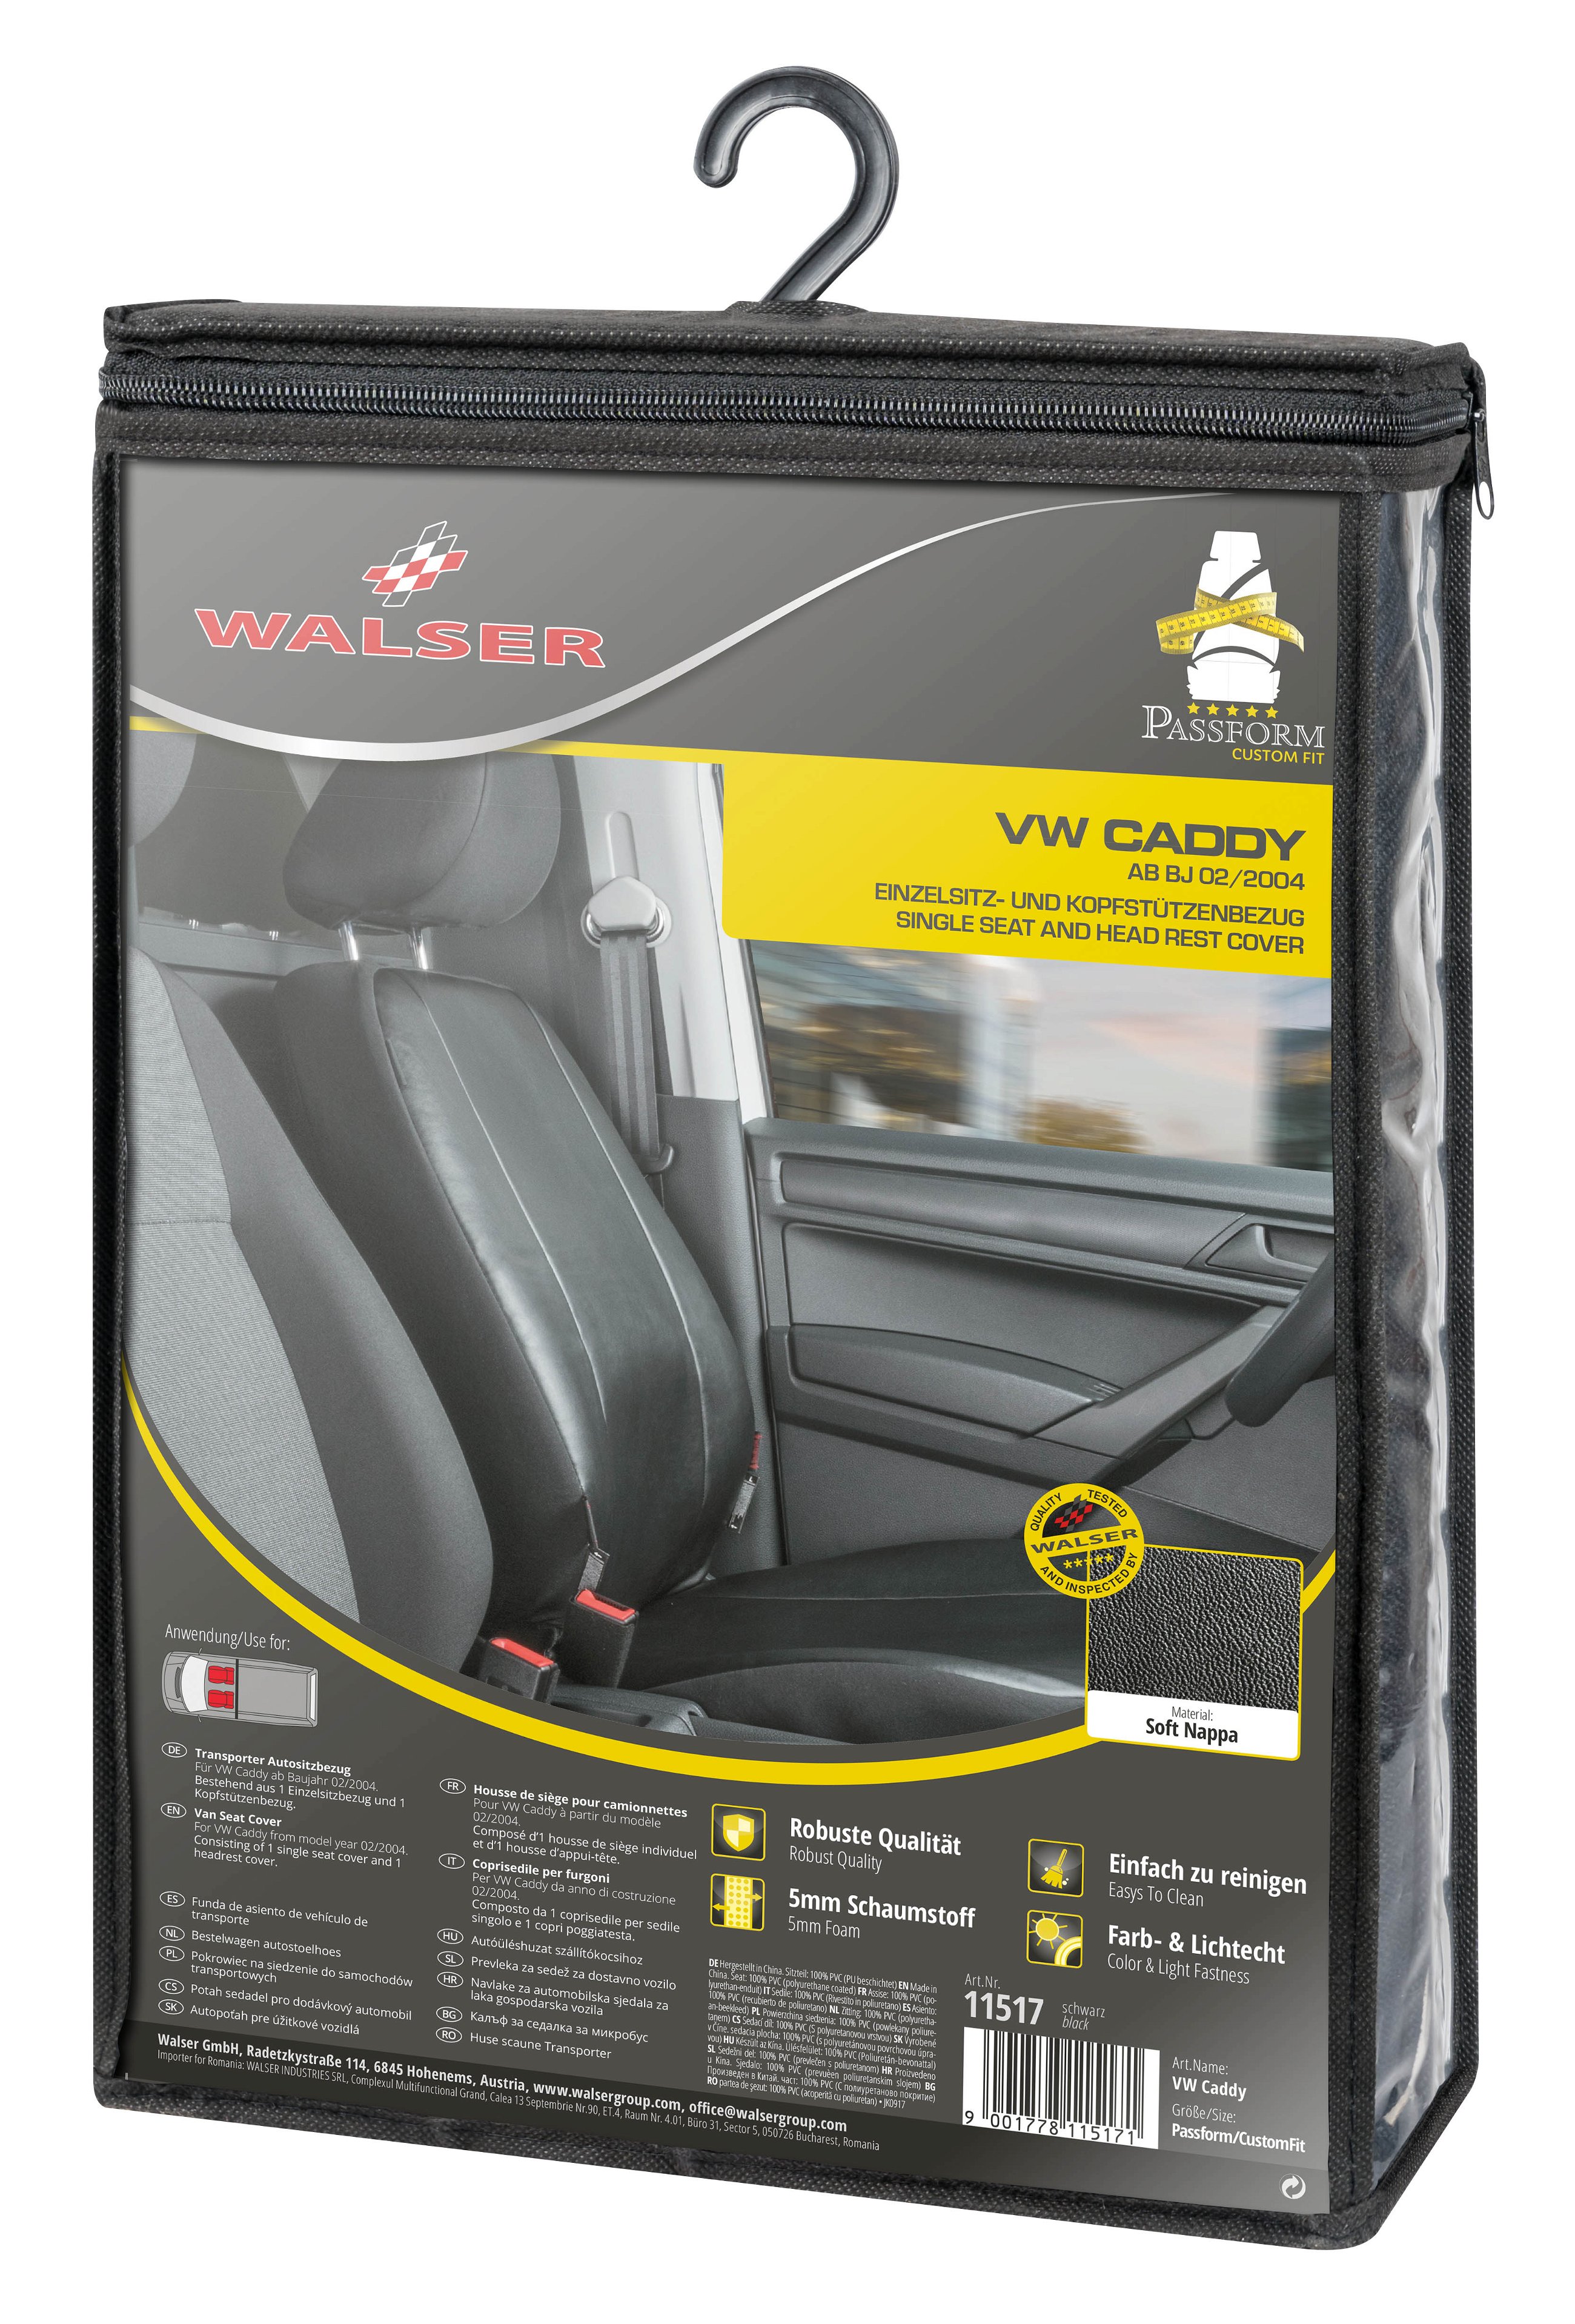 Seat cover made of imitation leather for VW Caddy, single seat cover front